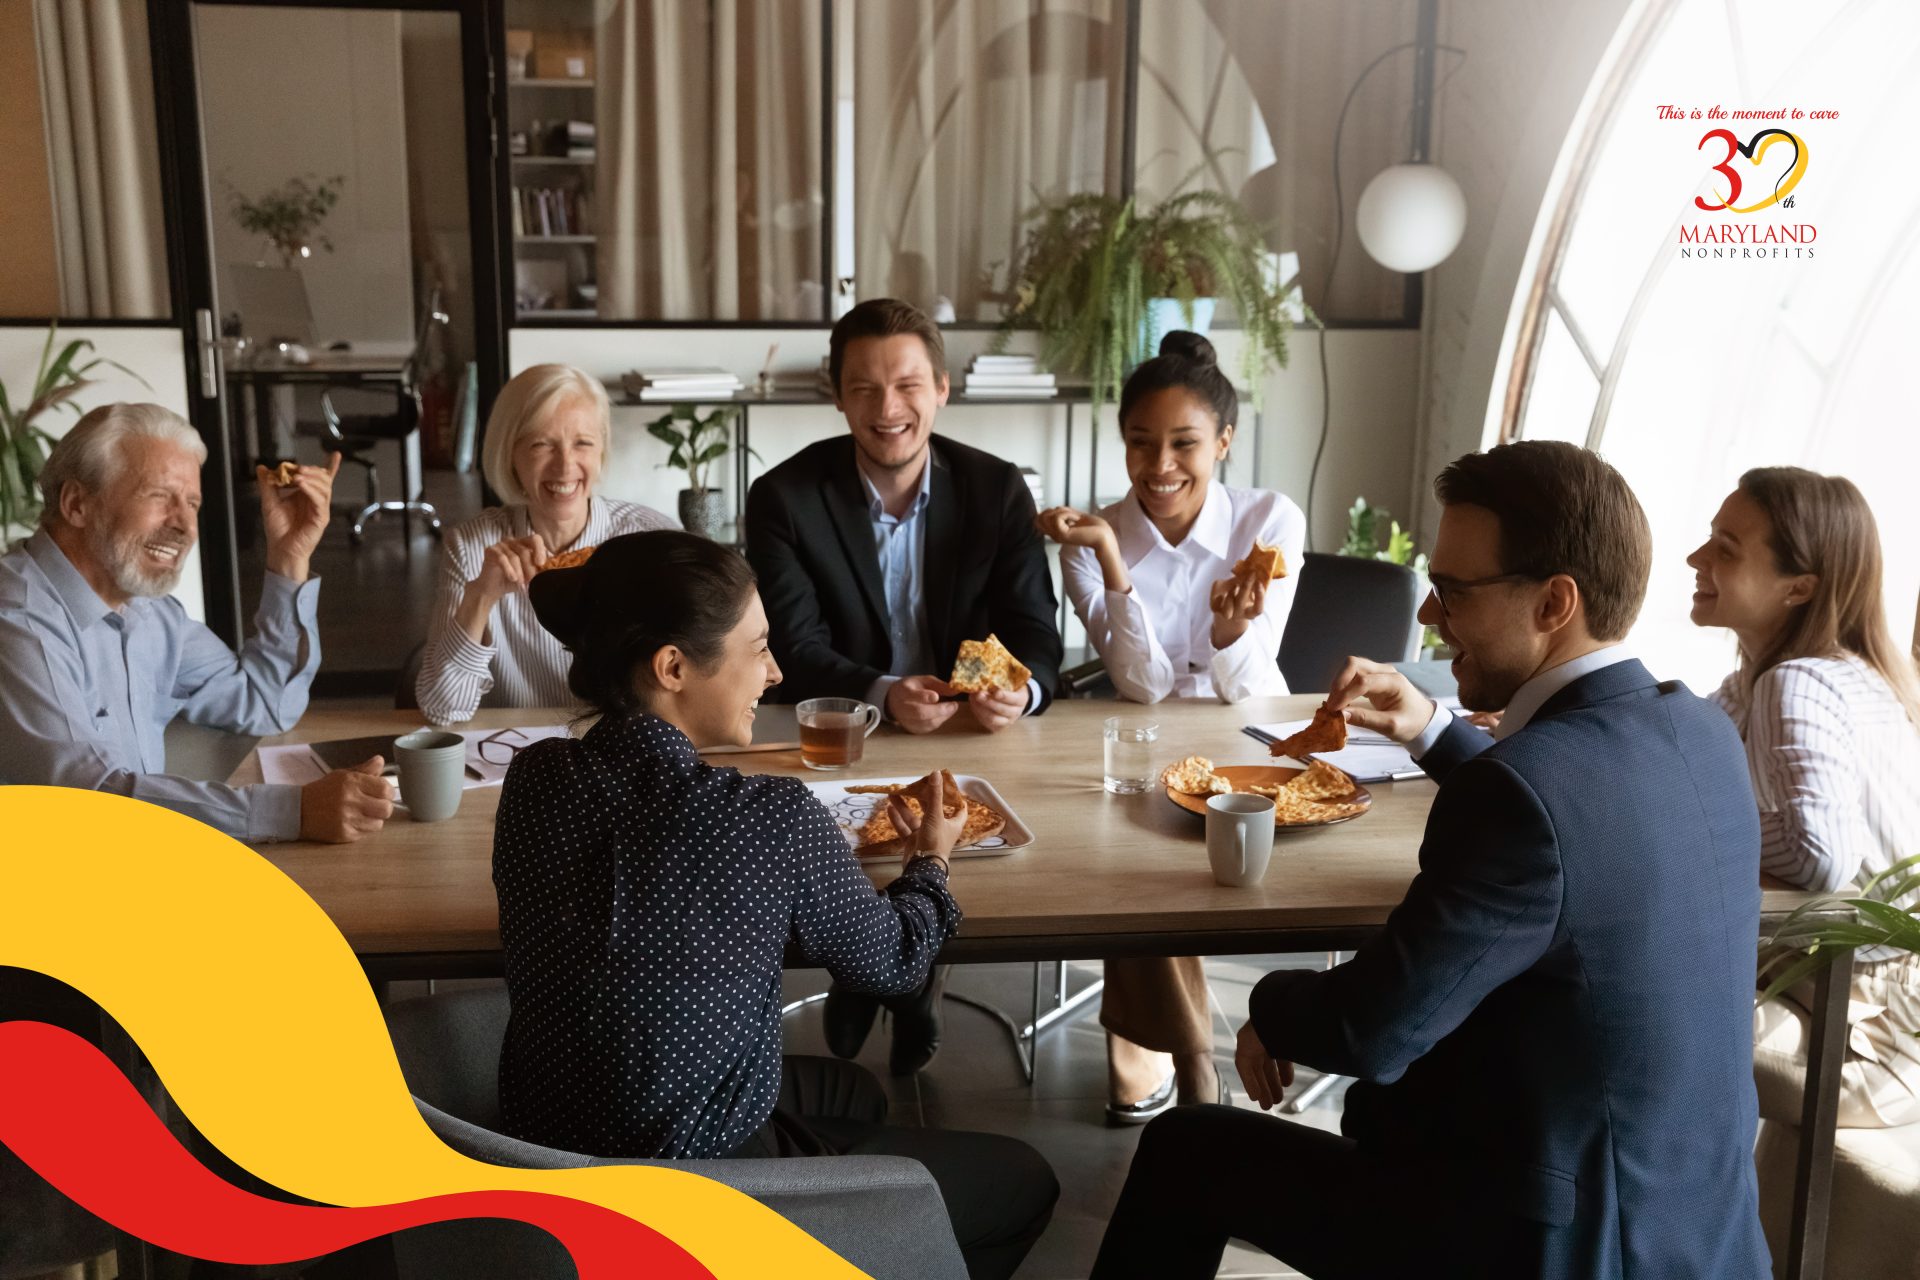 Group of people in work attire sit around a conference table eating pizza and laughing. They are diverse in age and race.